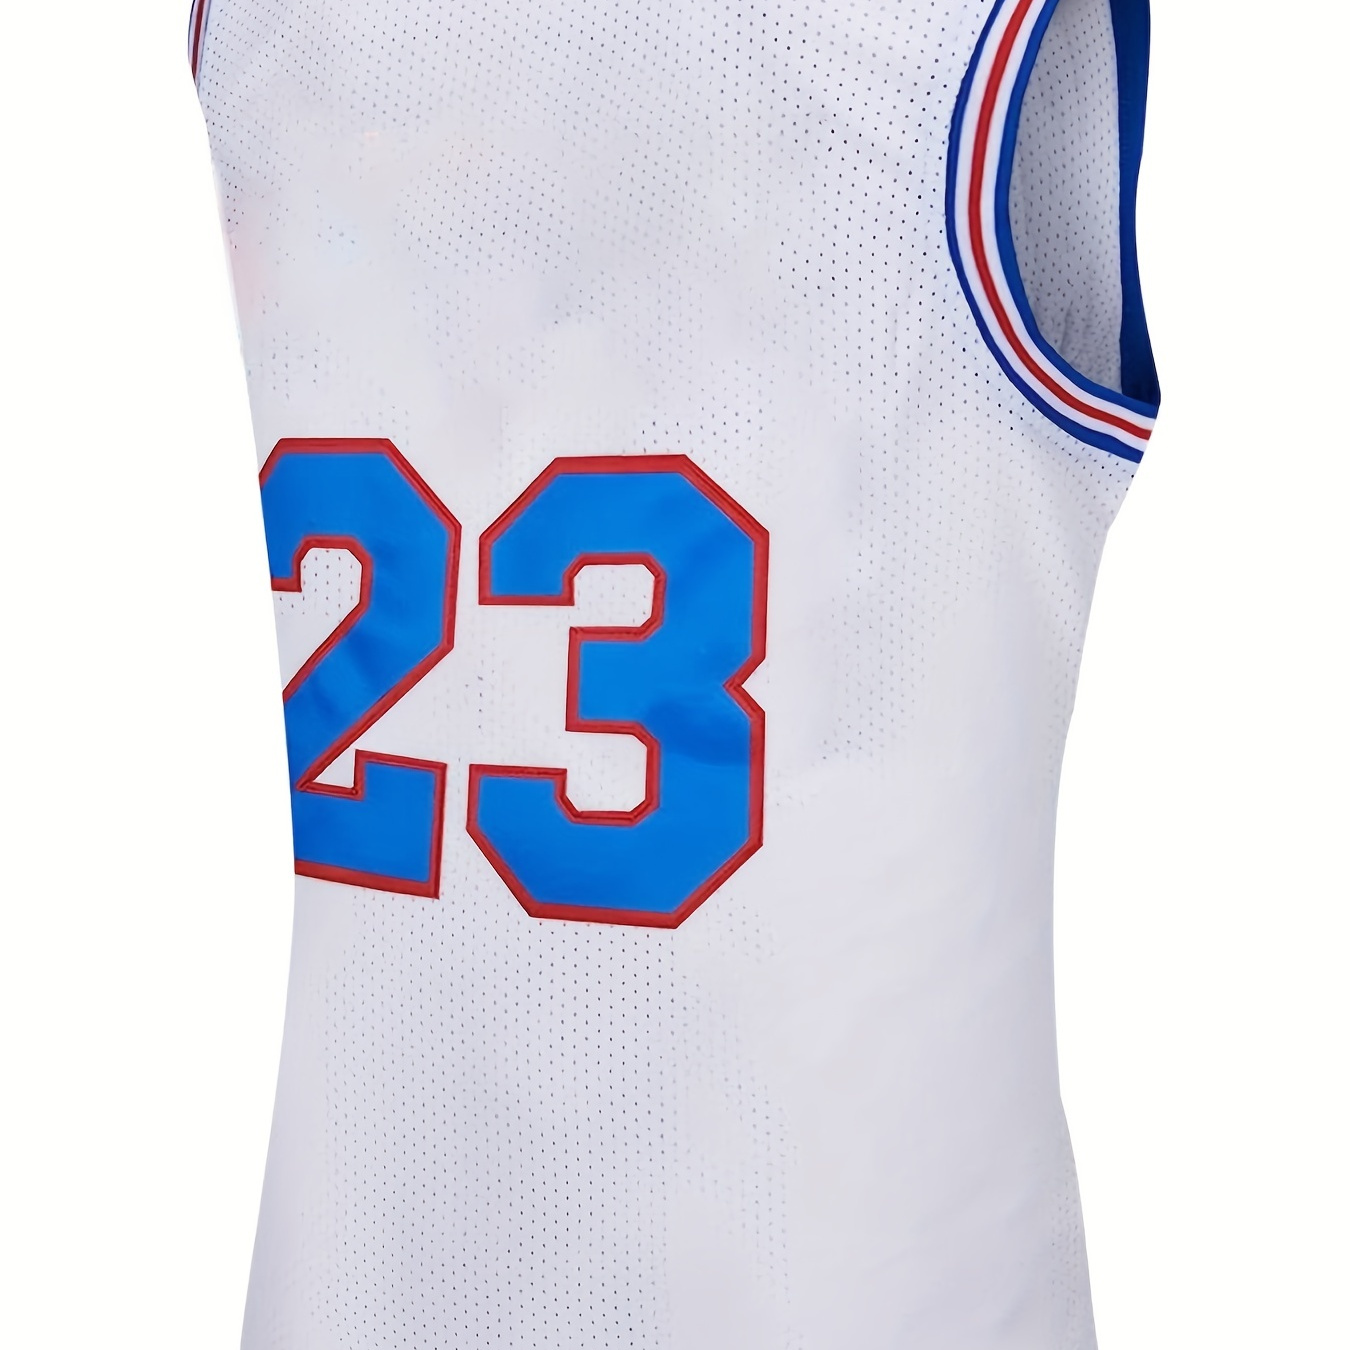  Men's No. 23 Basketball Jersey Classic Party Space Movie Jordan  Bug Jersey Unisex 90s Hip Hop Clothing Red/Black Jersey. (23# Black, S) :  Sports & Outdoors